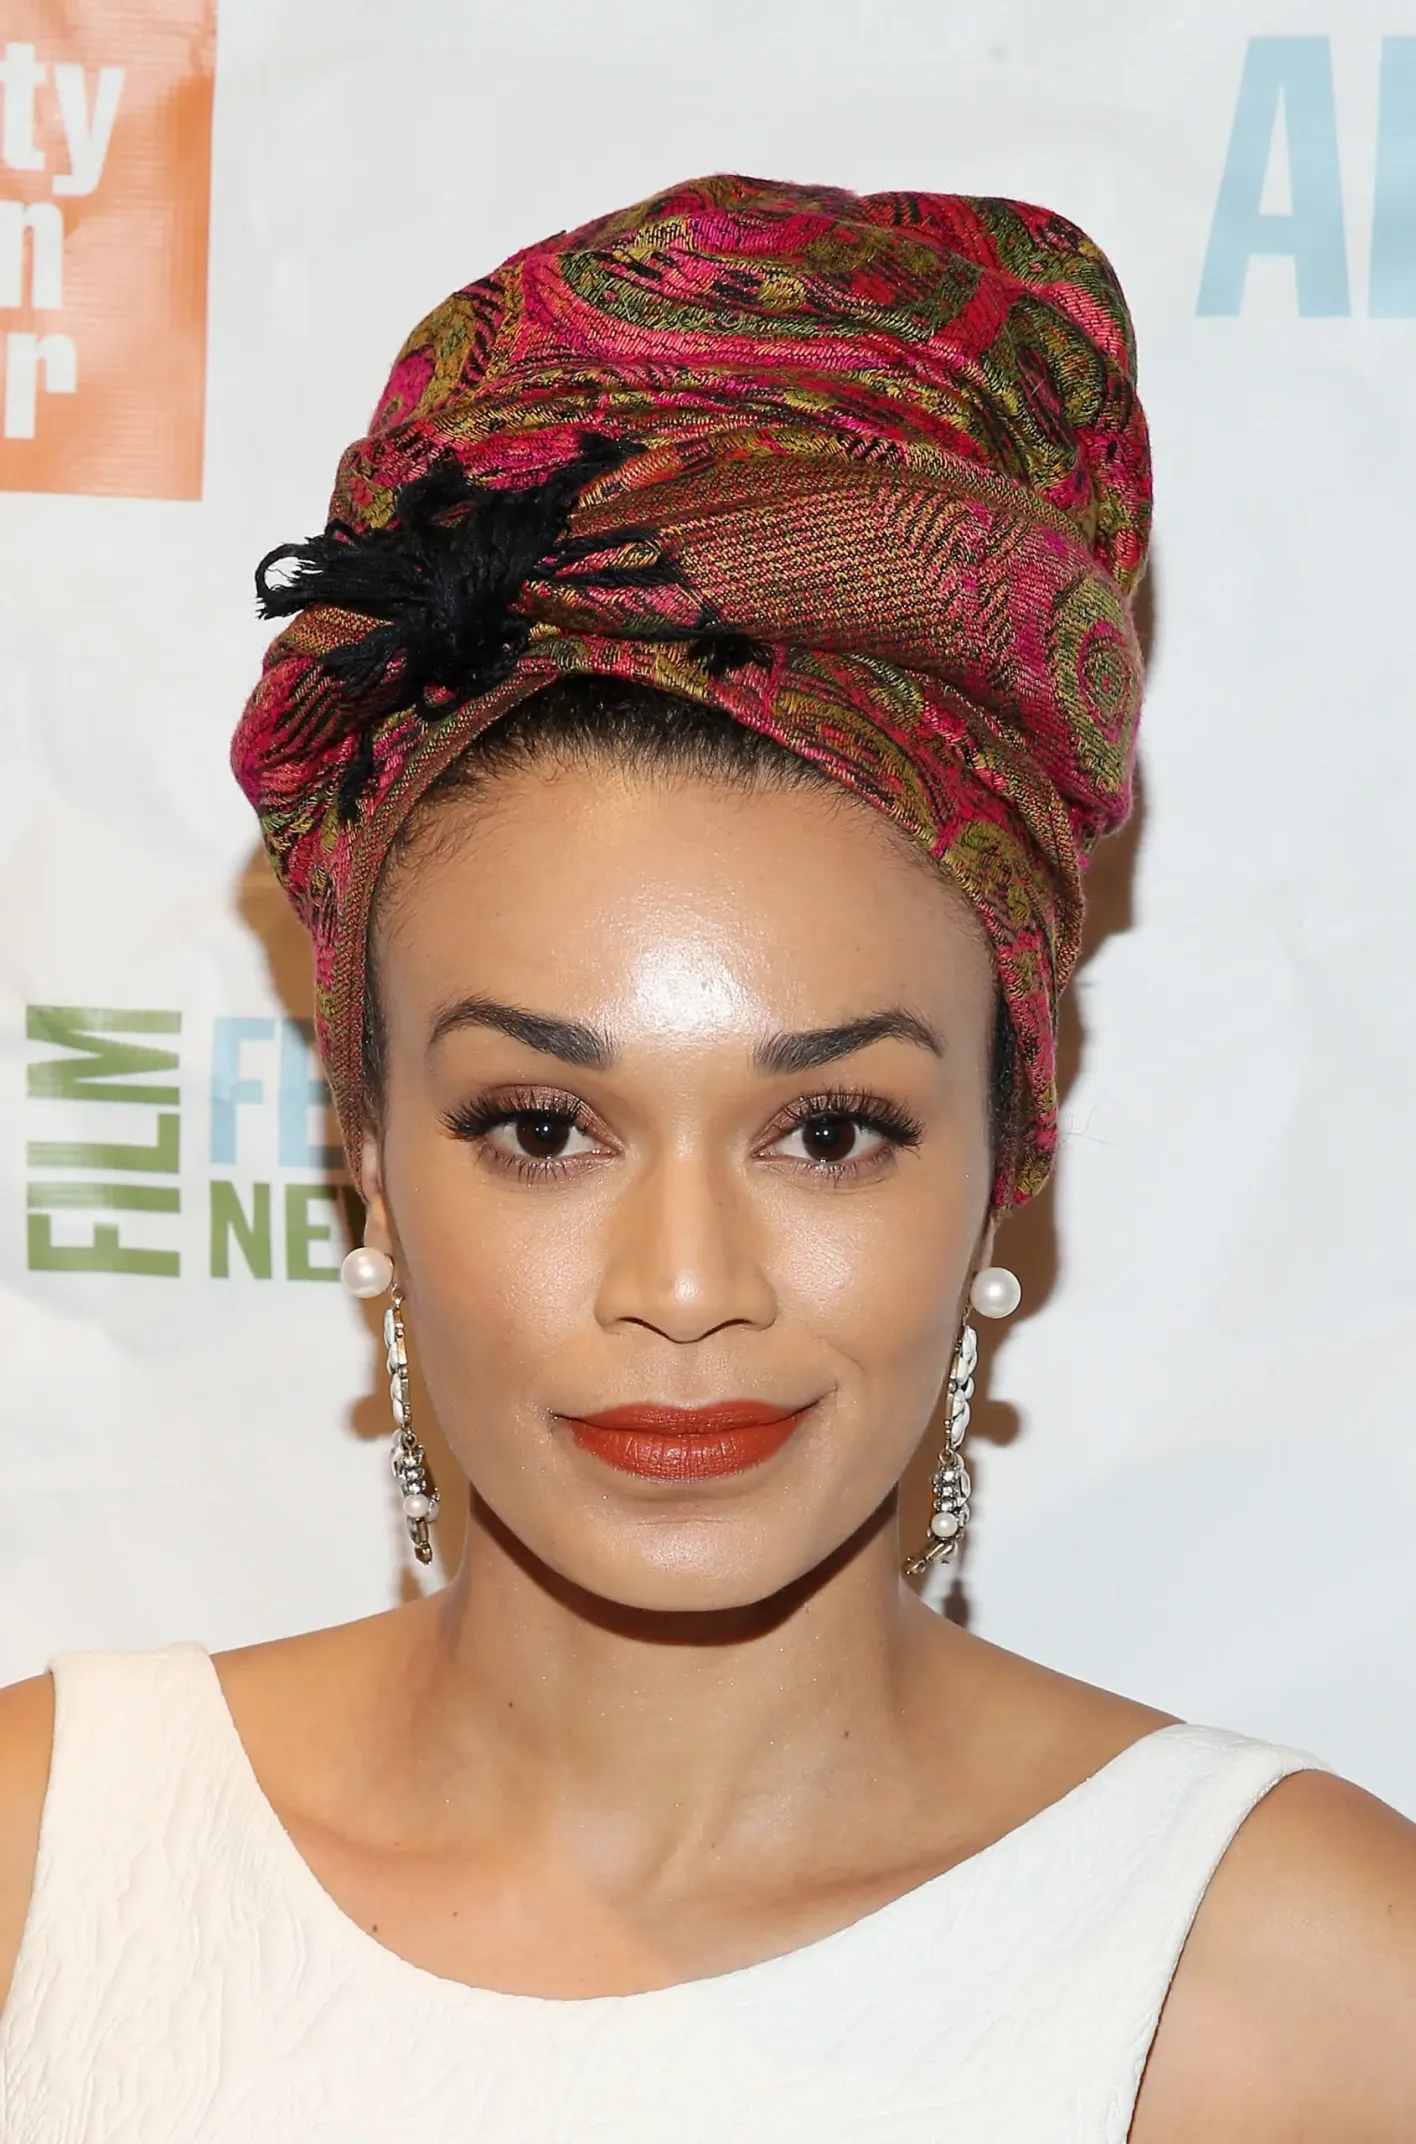 Pearl Thusi responds after being attacked for ‘taking’ Big Zulu from Bonang